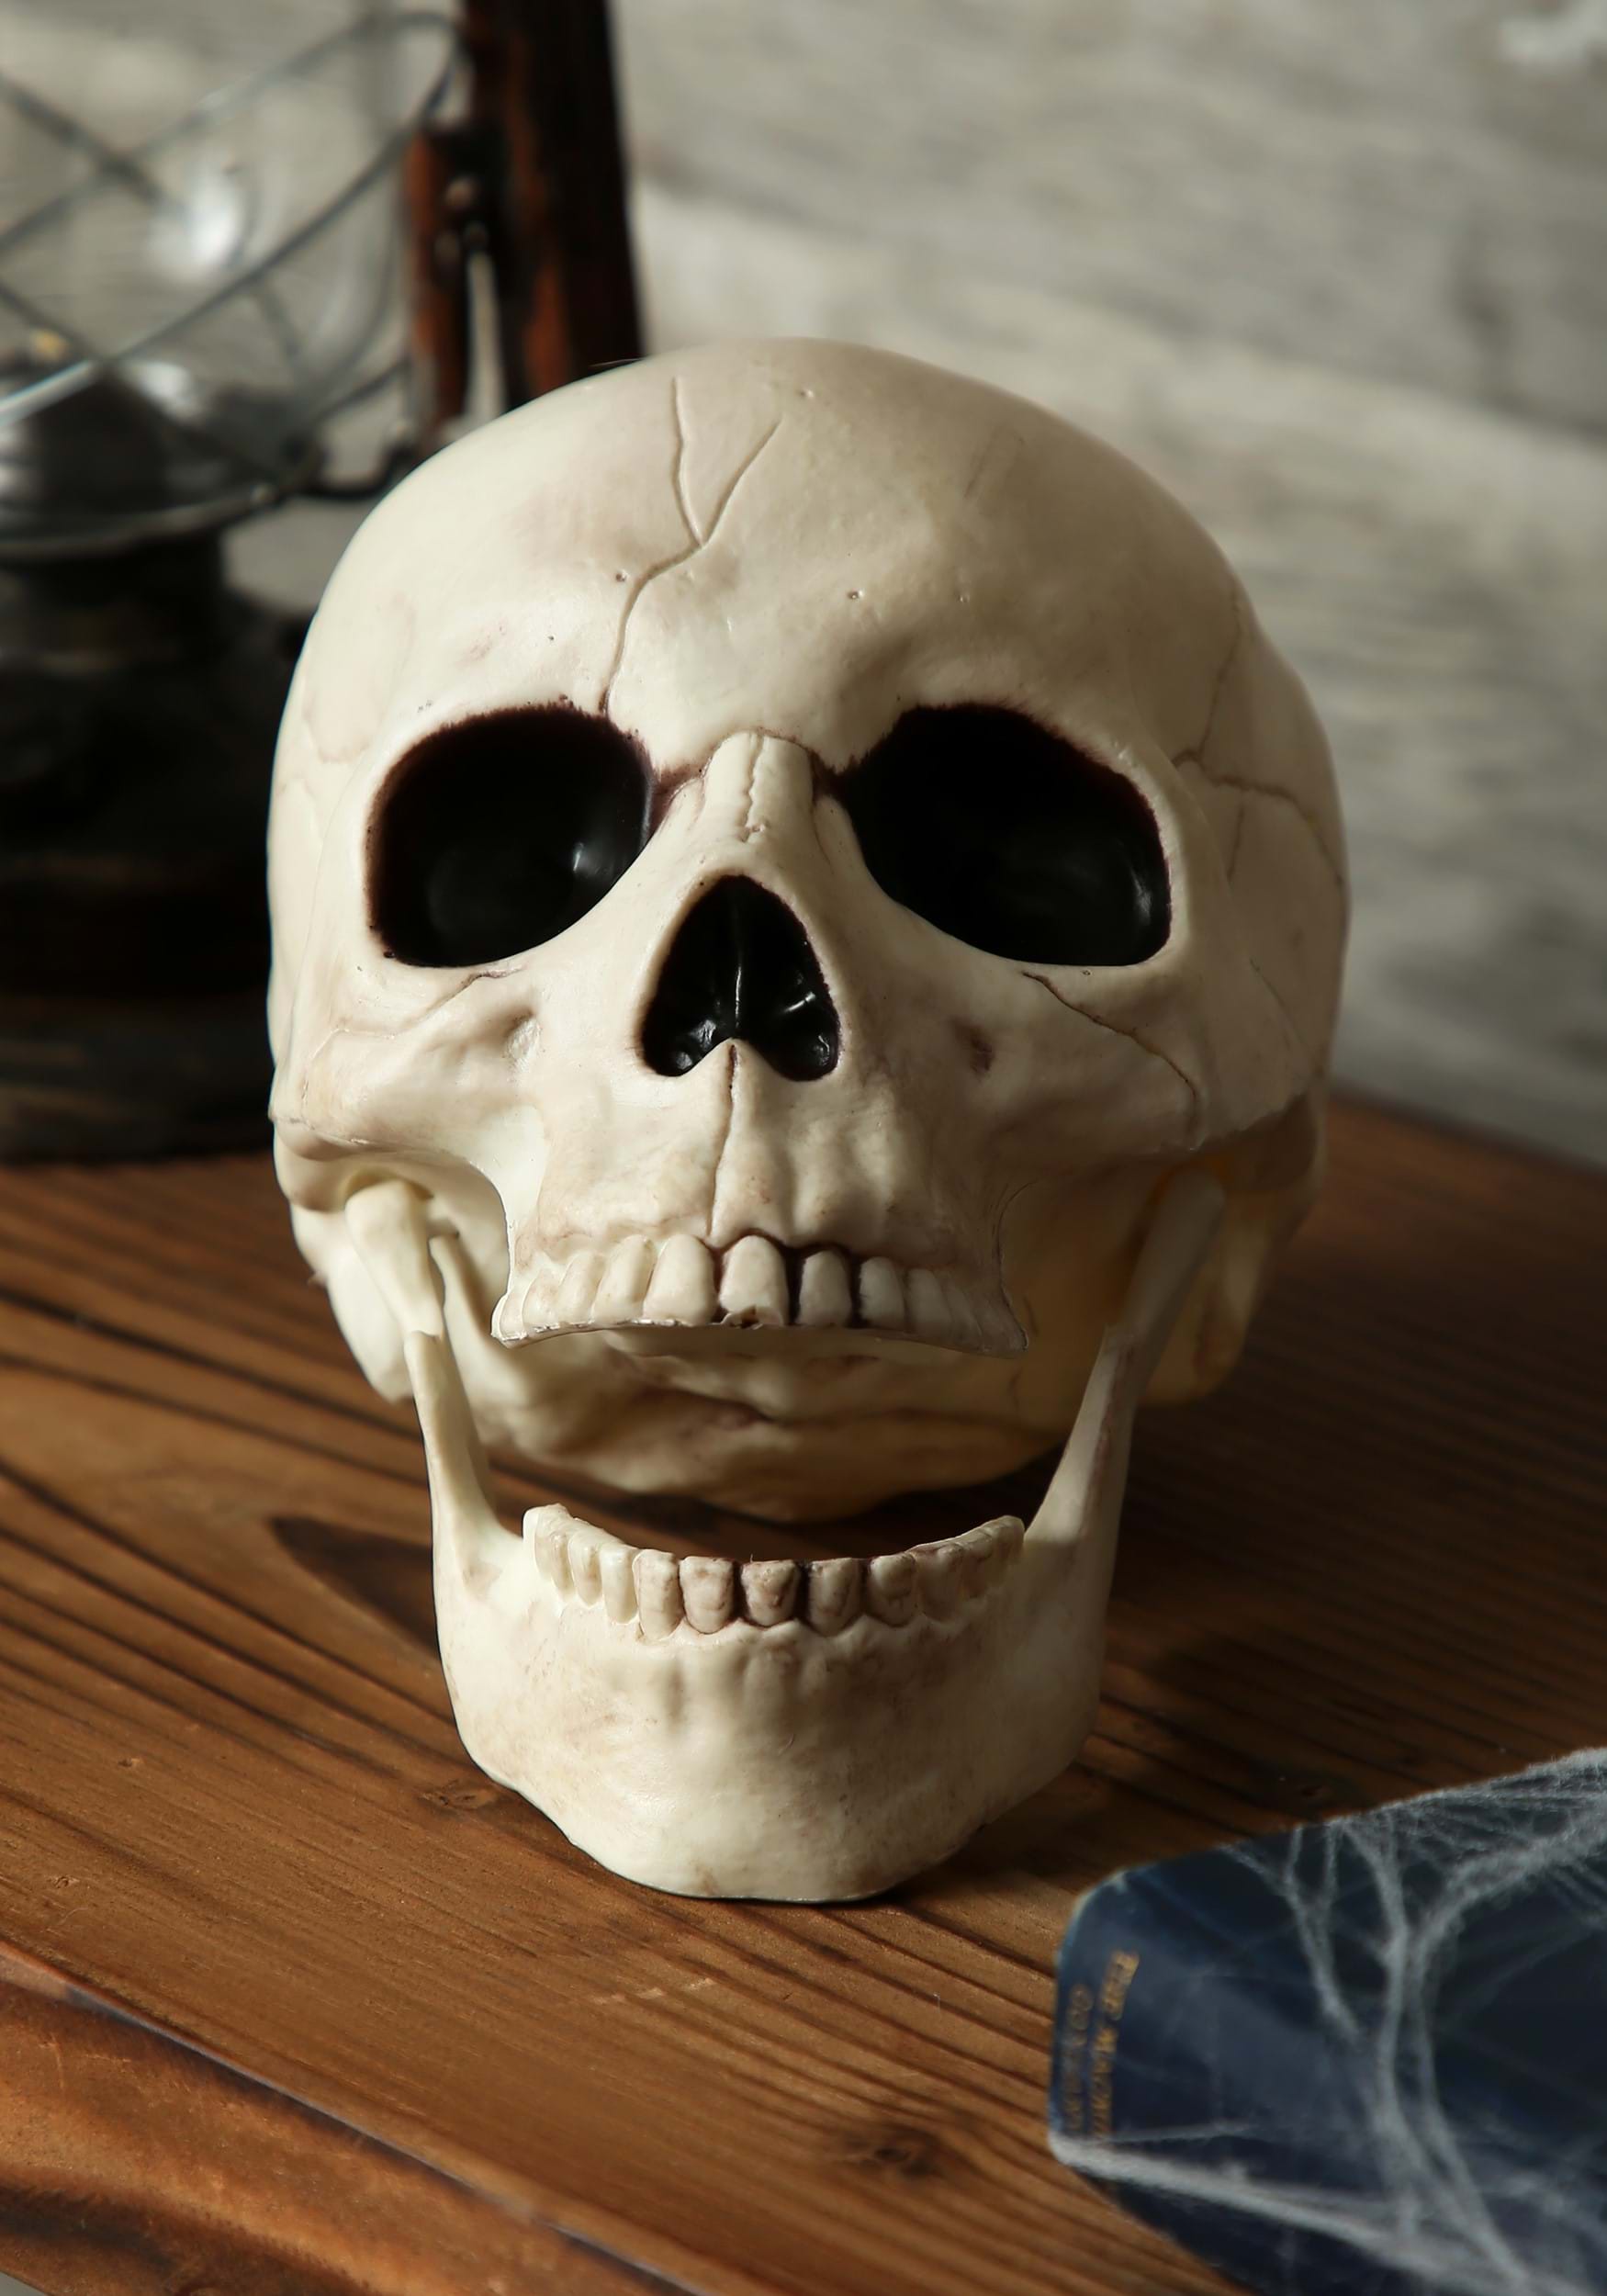 Skull Movable Jaw